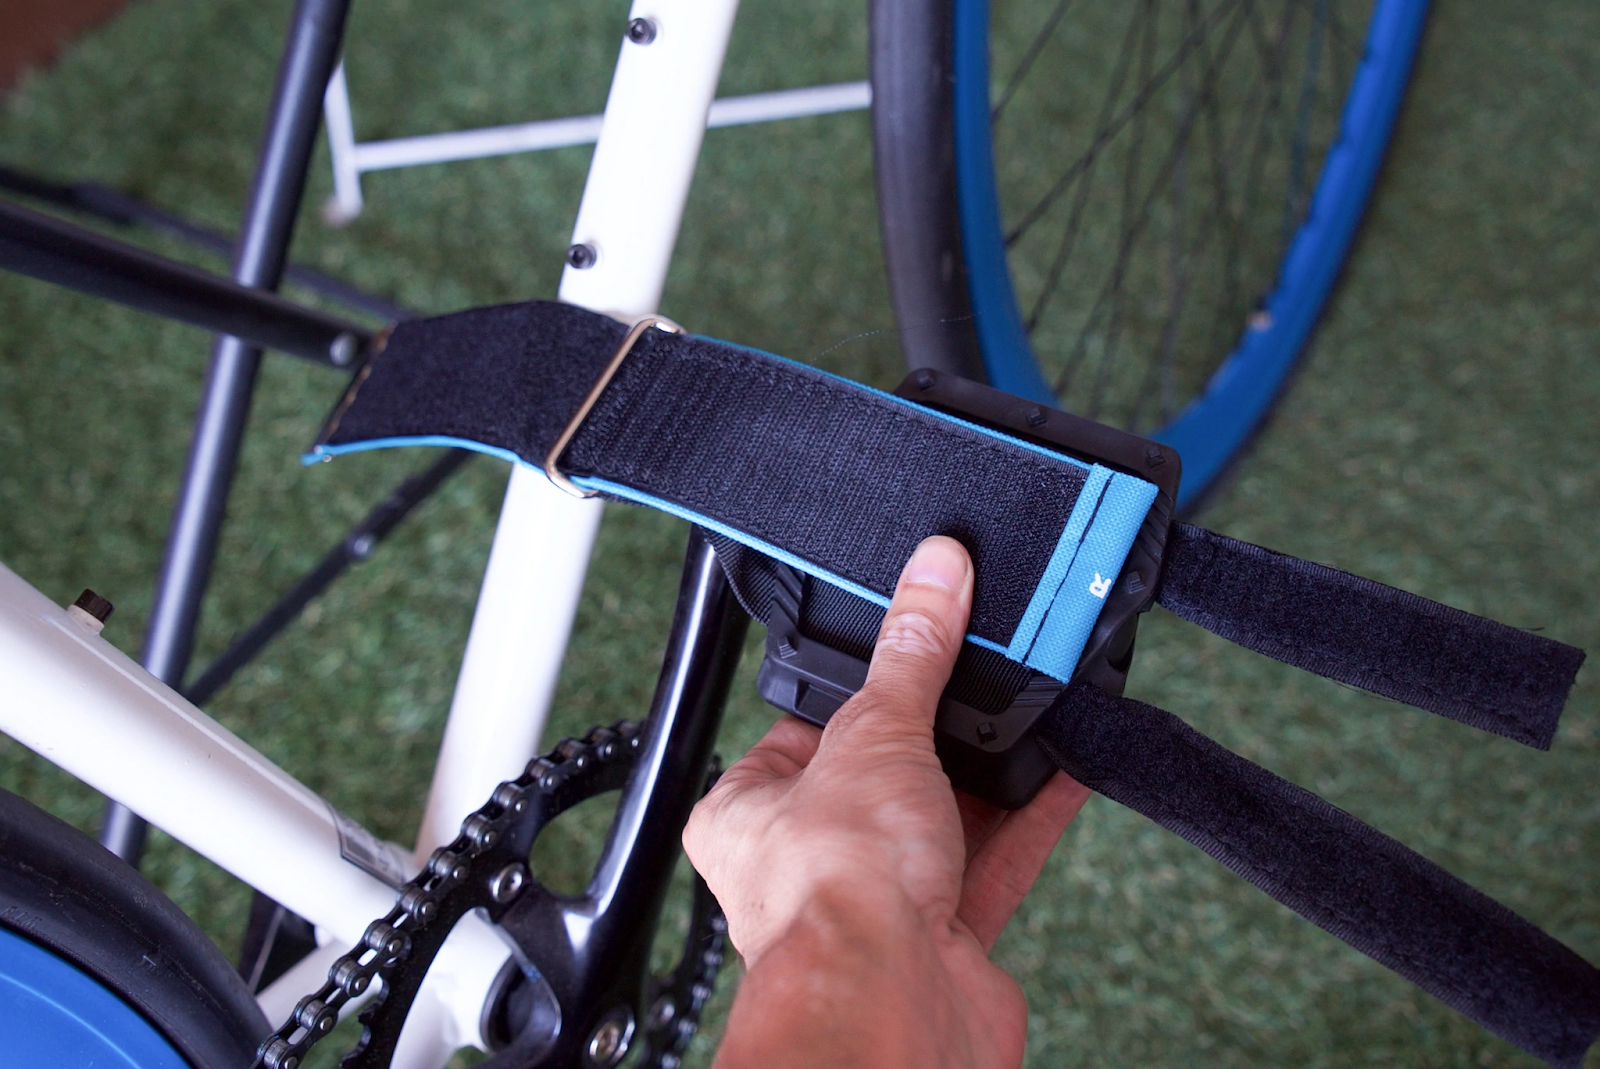 To install mountain bike pedal straps, the two straps of the bottom section should be threaded through the pedal and the top part of the pedal strap threaded through the metal clasp of the bottom half of the pedal clasp.  